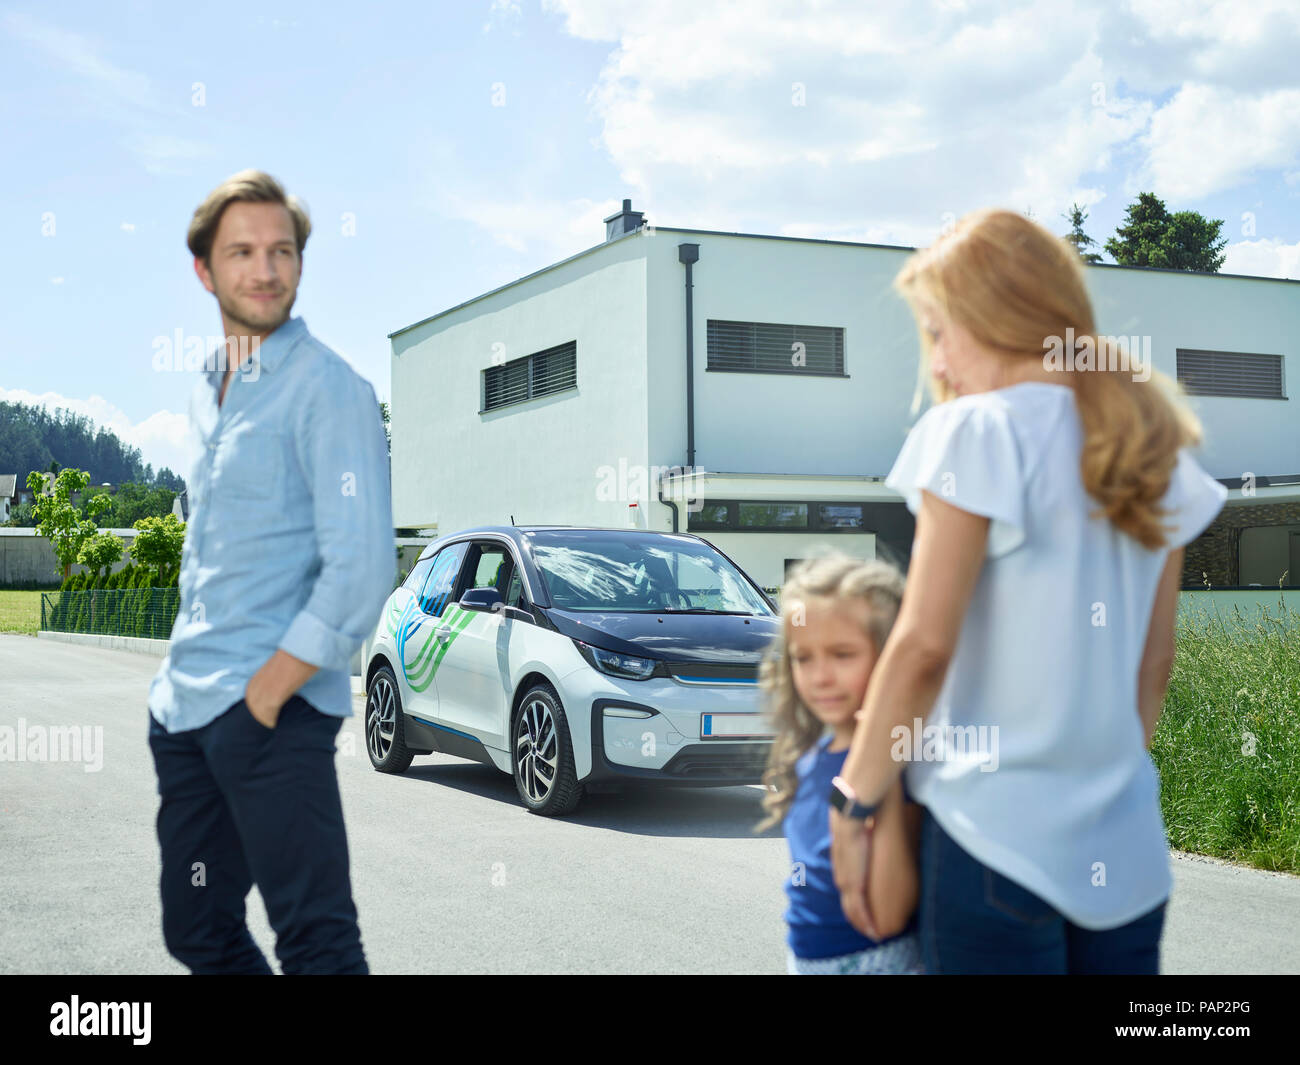 Family with electric car in front of house Stock Photo